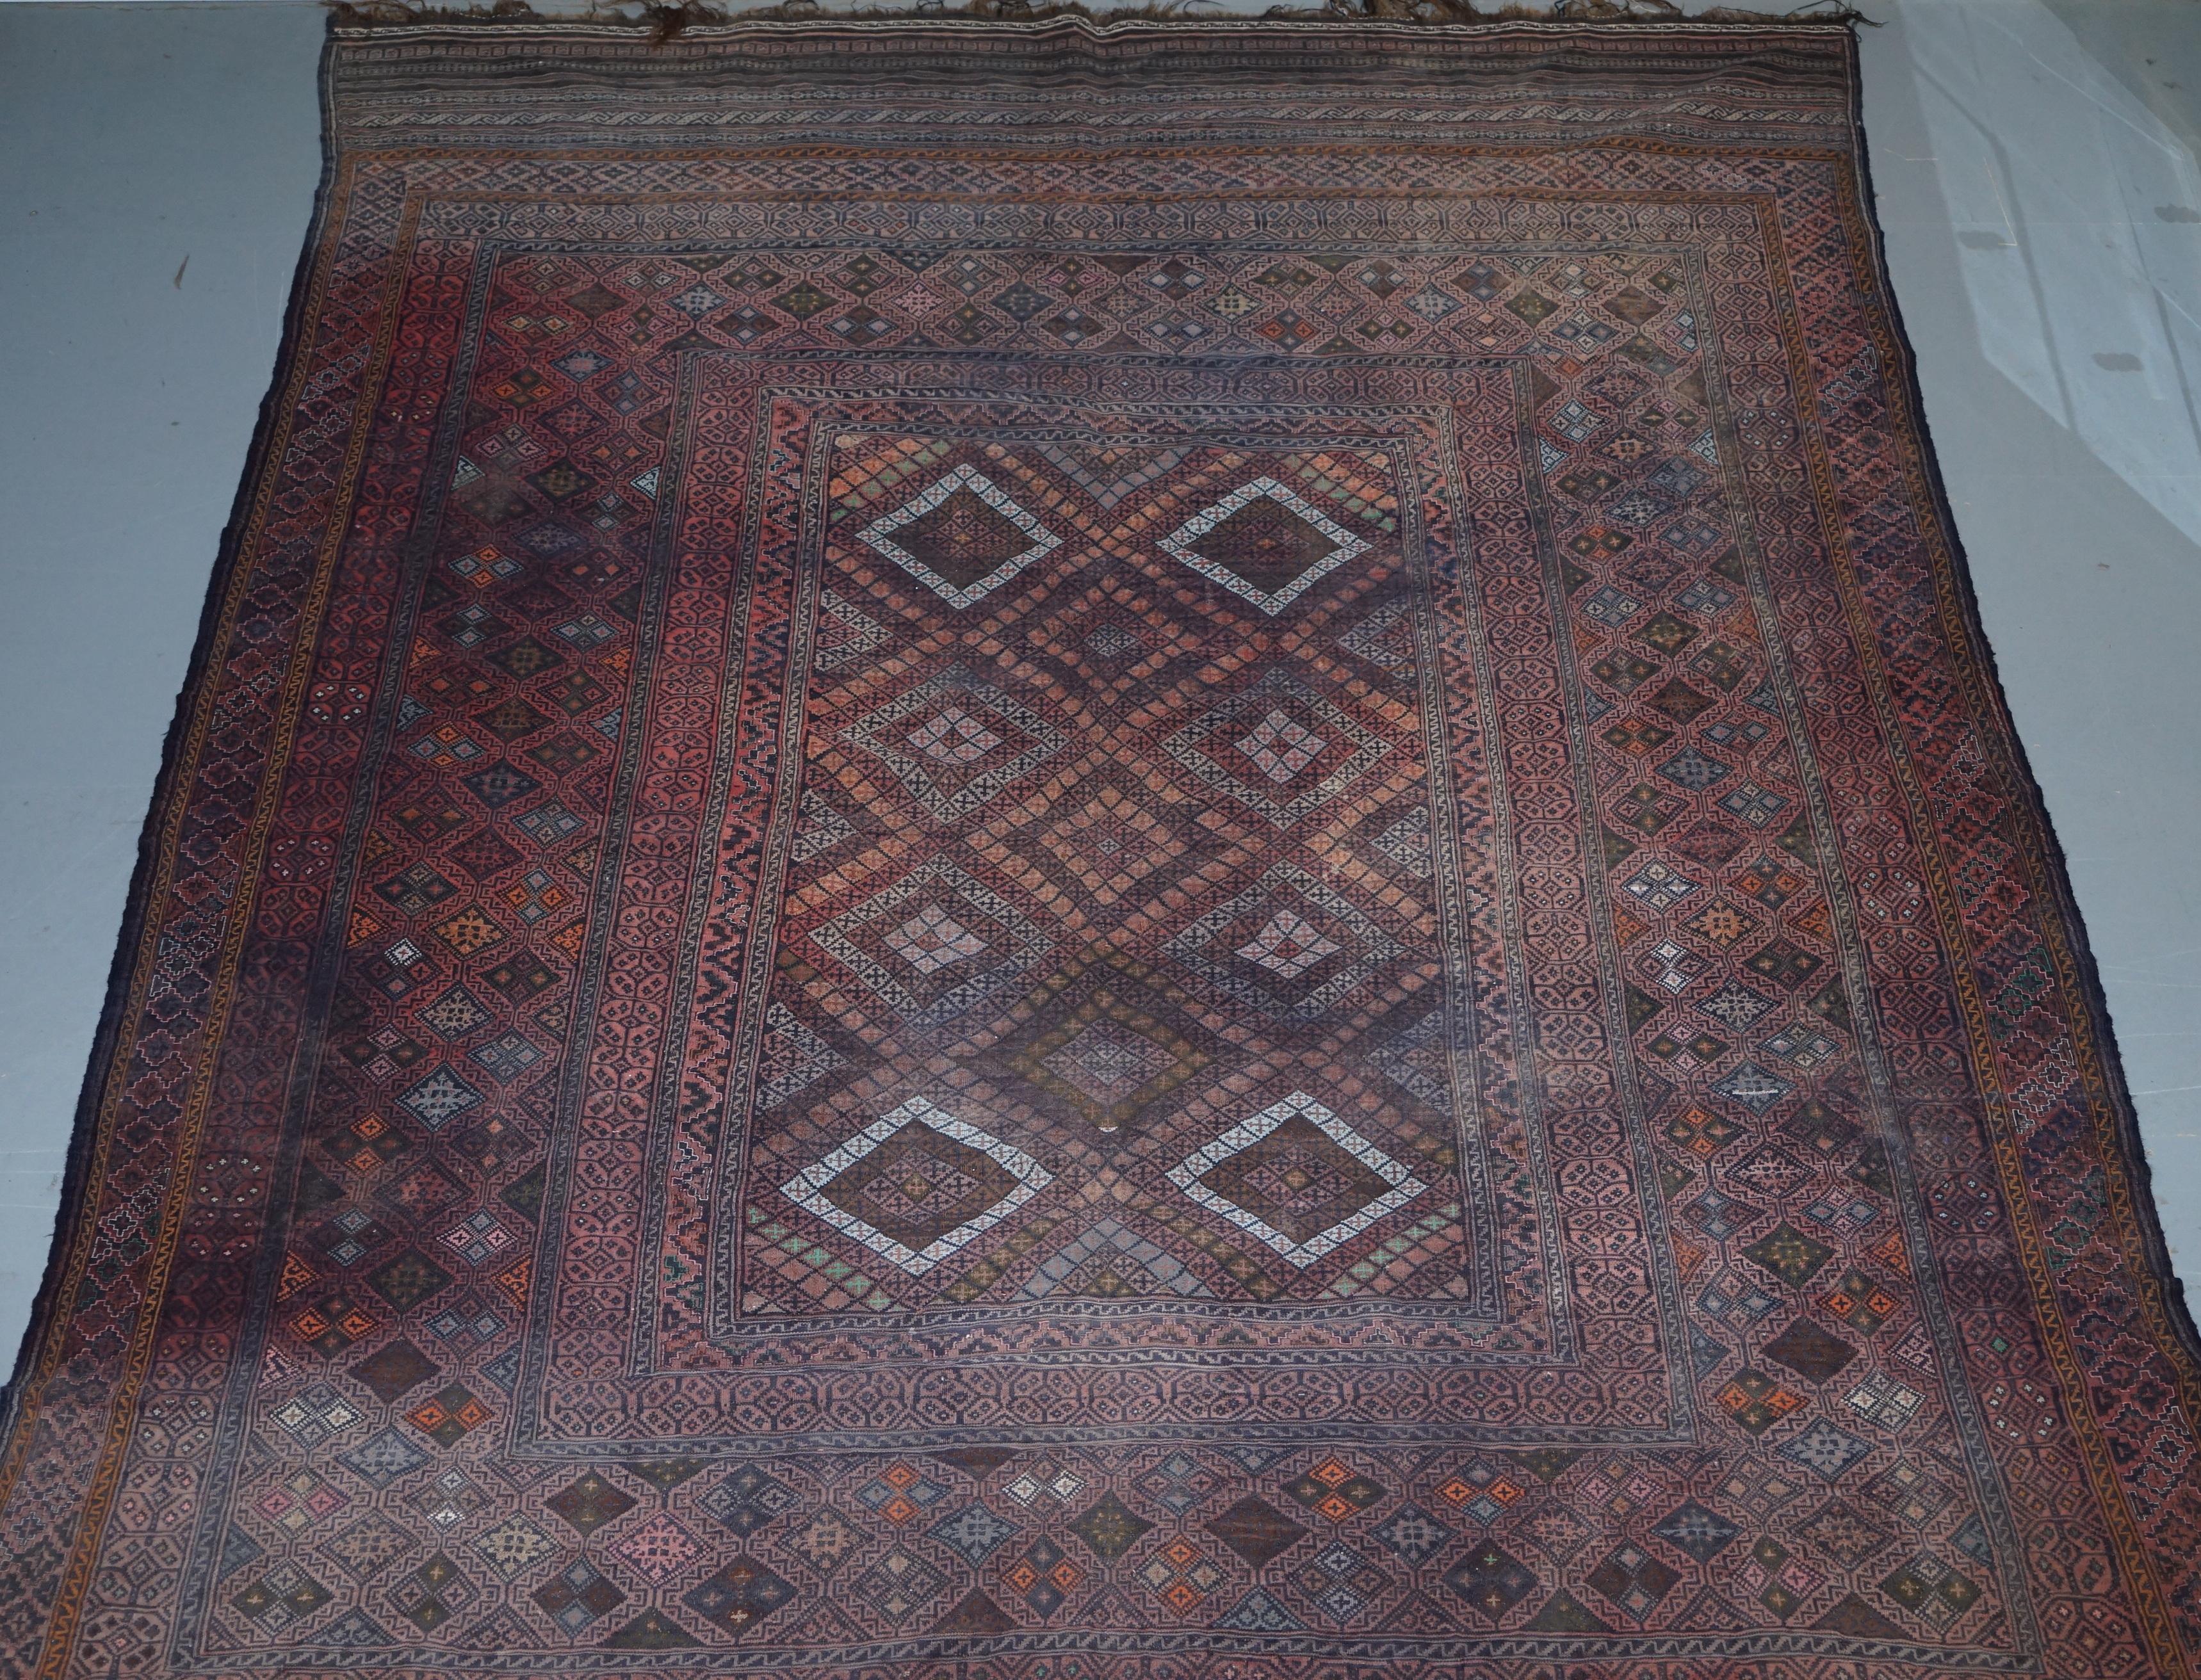 Hand-Crafted Very Old Worn Antique Kilim Large Floor Rug Hand Knotted and Woven